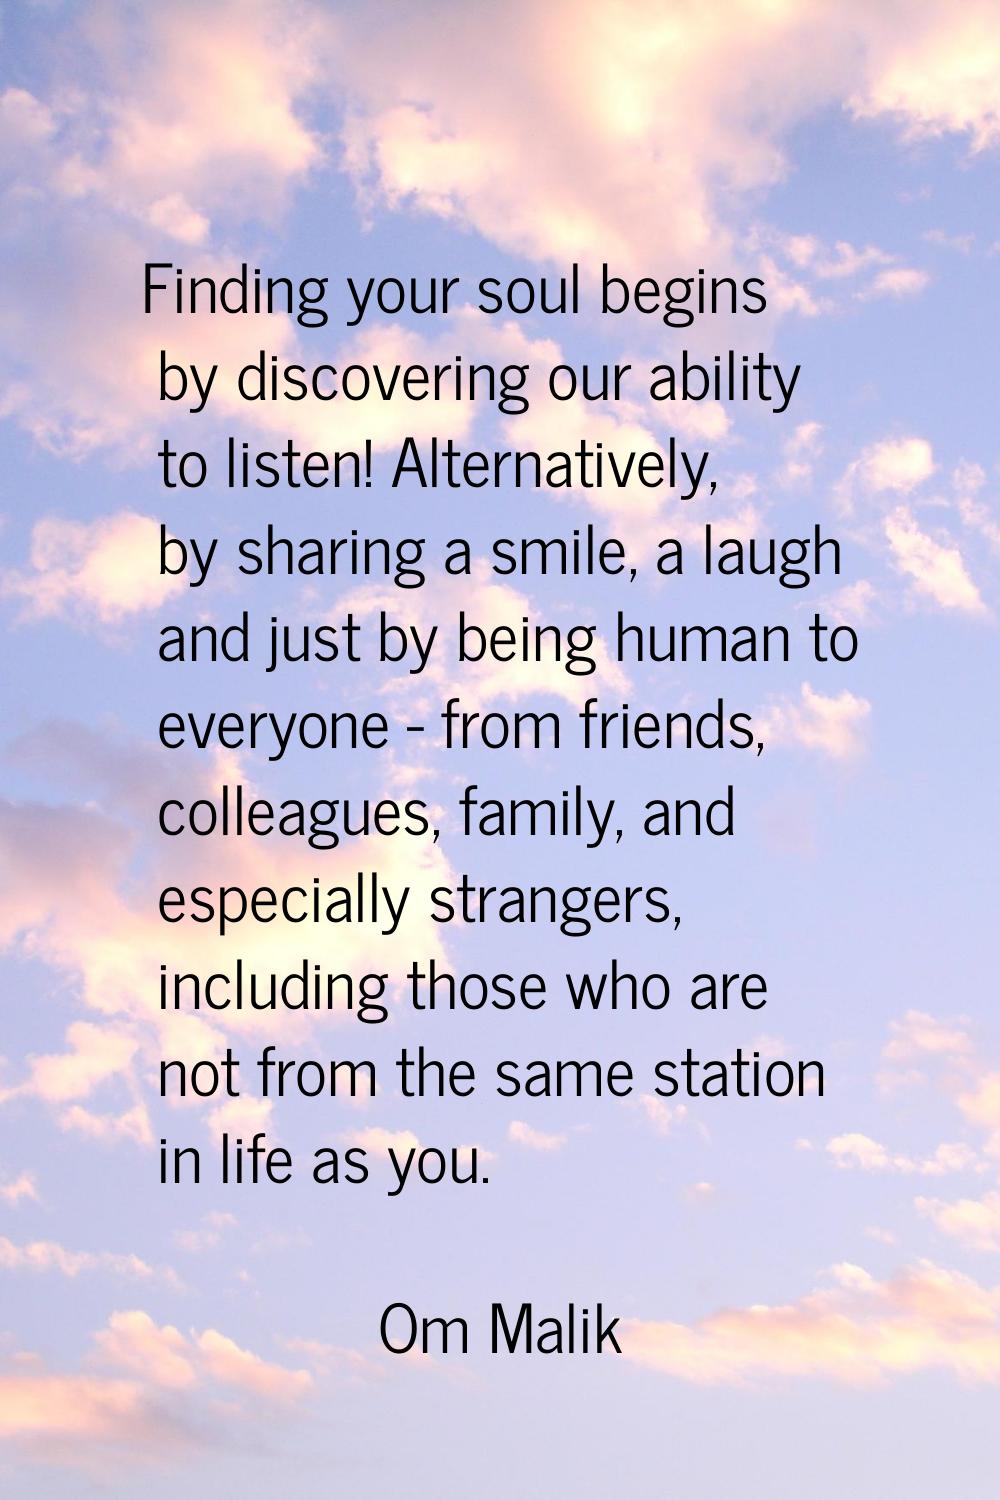 Finding your soul begins by discovering our ability to listen! Alternatively, by sharing a smile, a